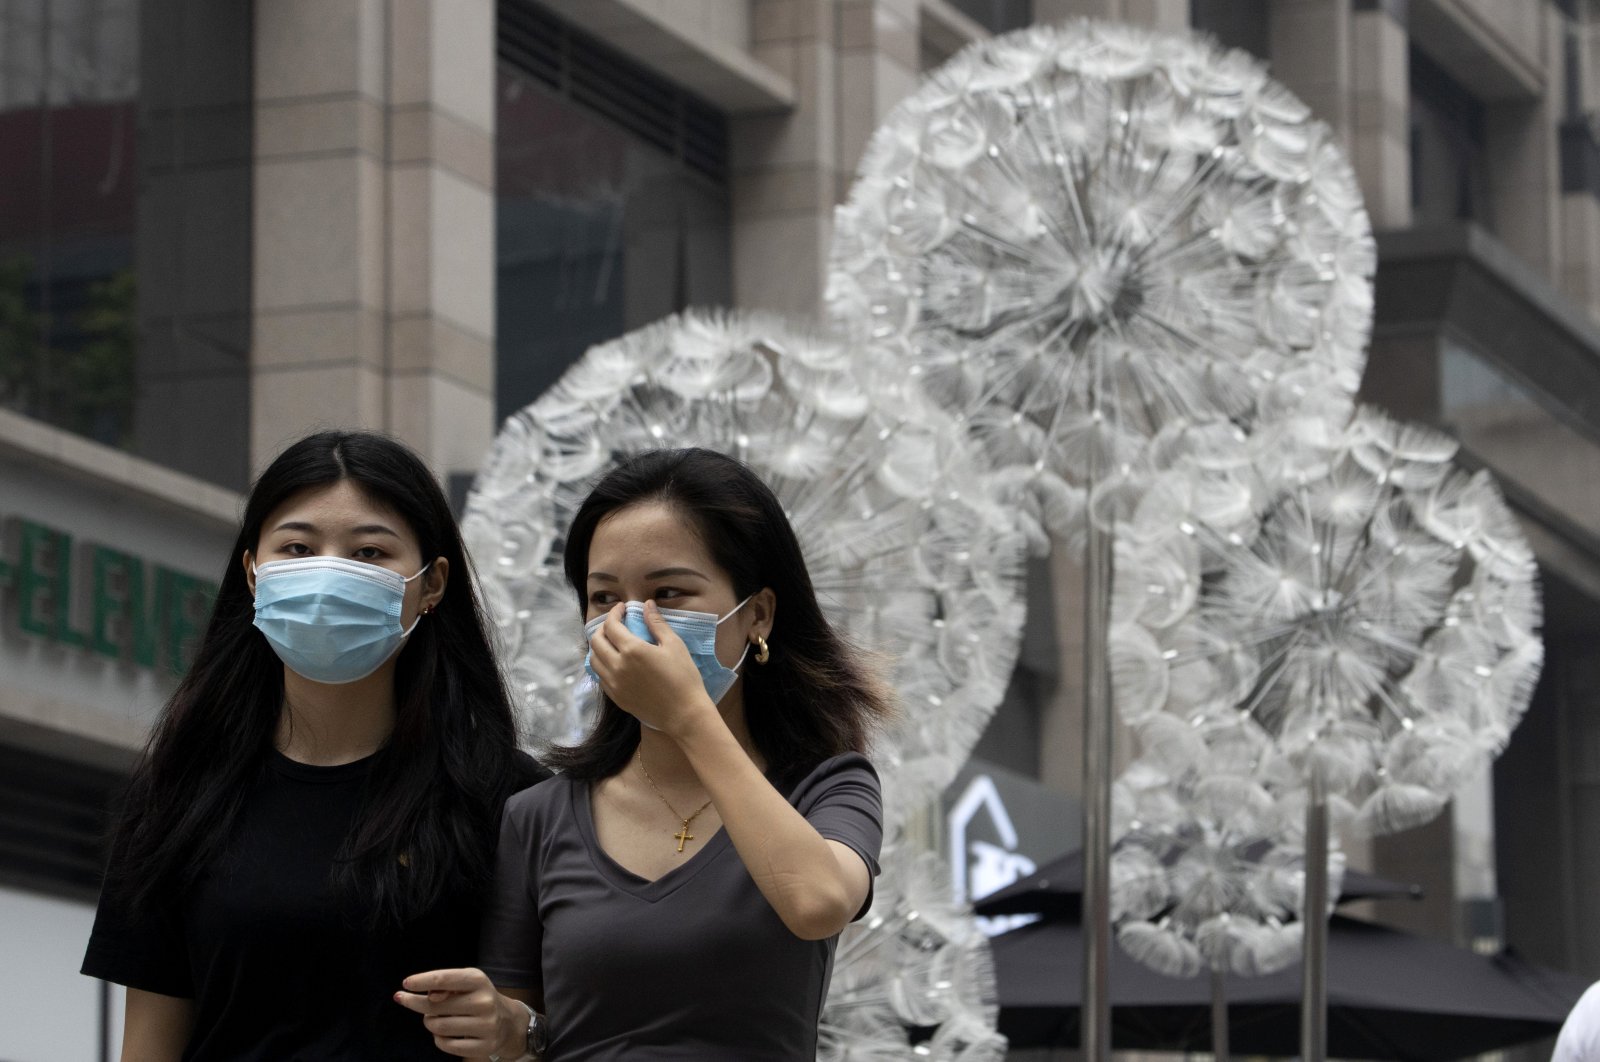 A woman adjusts her mask worn to protect against the coronavirus as they walk past a public art sculpture depicting giant spores in Beijing on Wednesday, Aug. 26, 2020. (AP Photo)